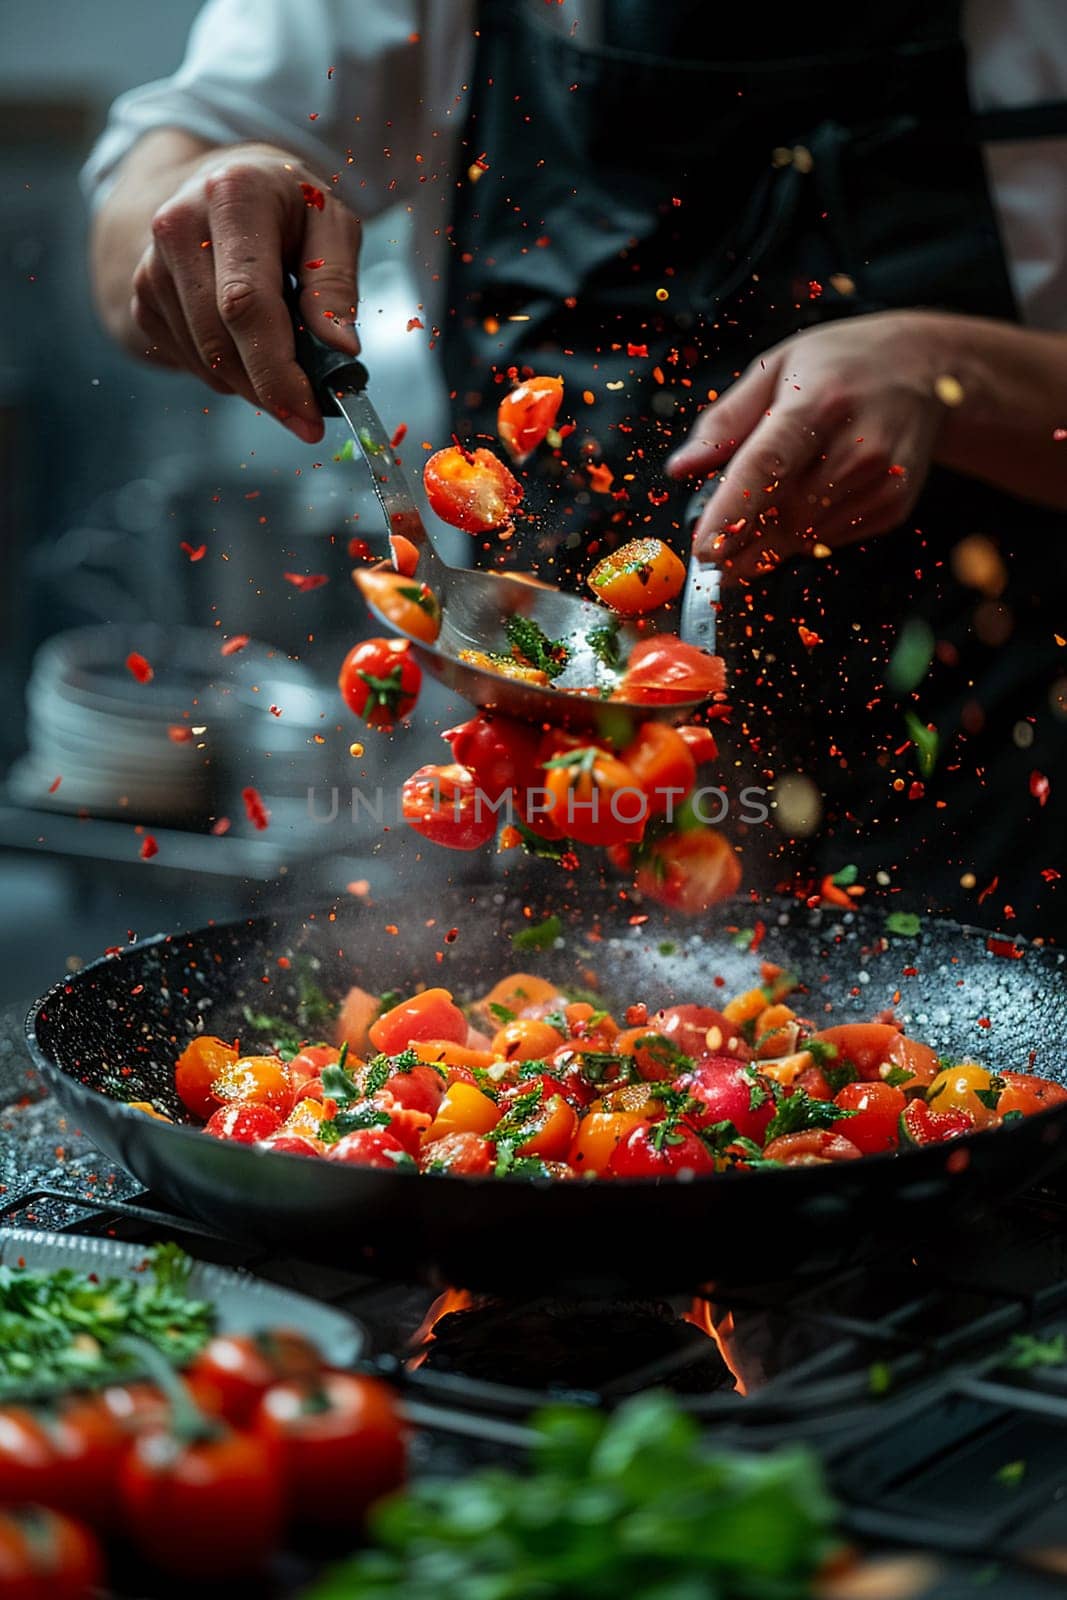 Chef tossing vegetables in a pan, symbolizing the action and passion in cooking